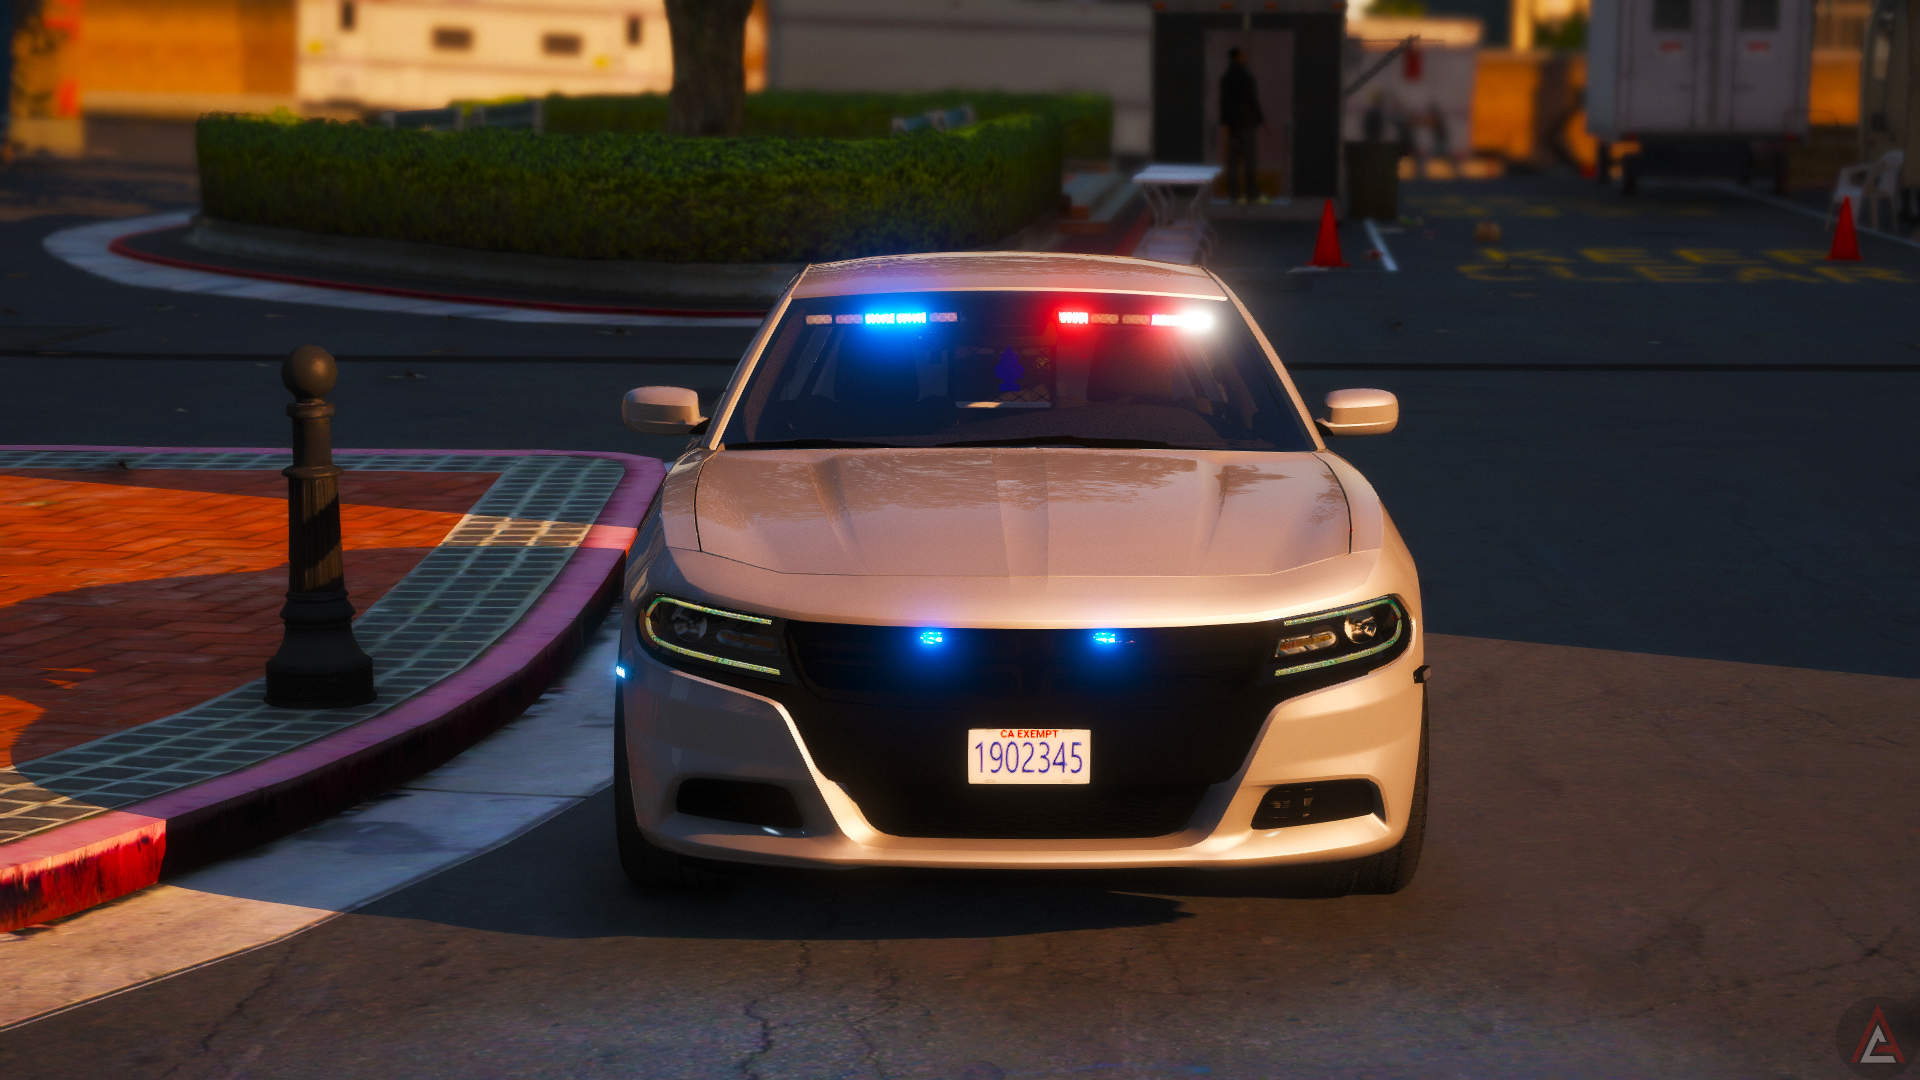 | LAPD CHARGER '16 UNMARKED |